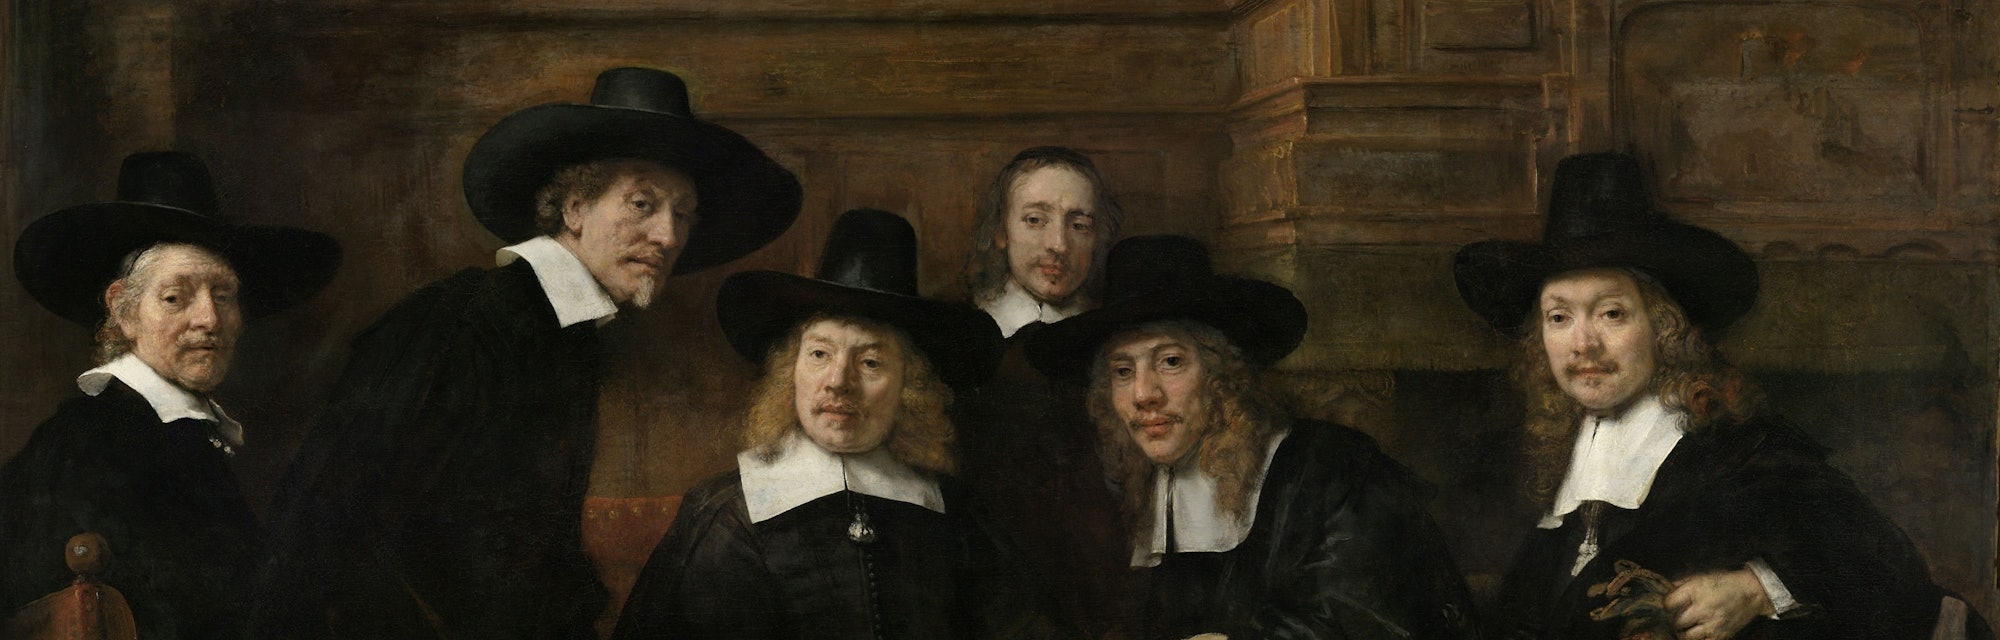 The Syndics, by Rembrandt van Rijn, 1662, Dutch painting, oil on canvas. The painting, original titl...